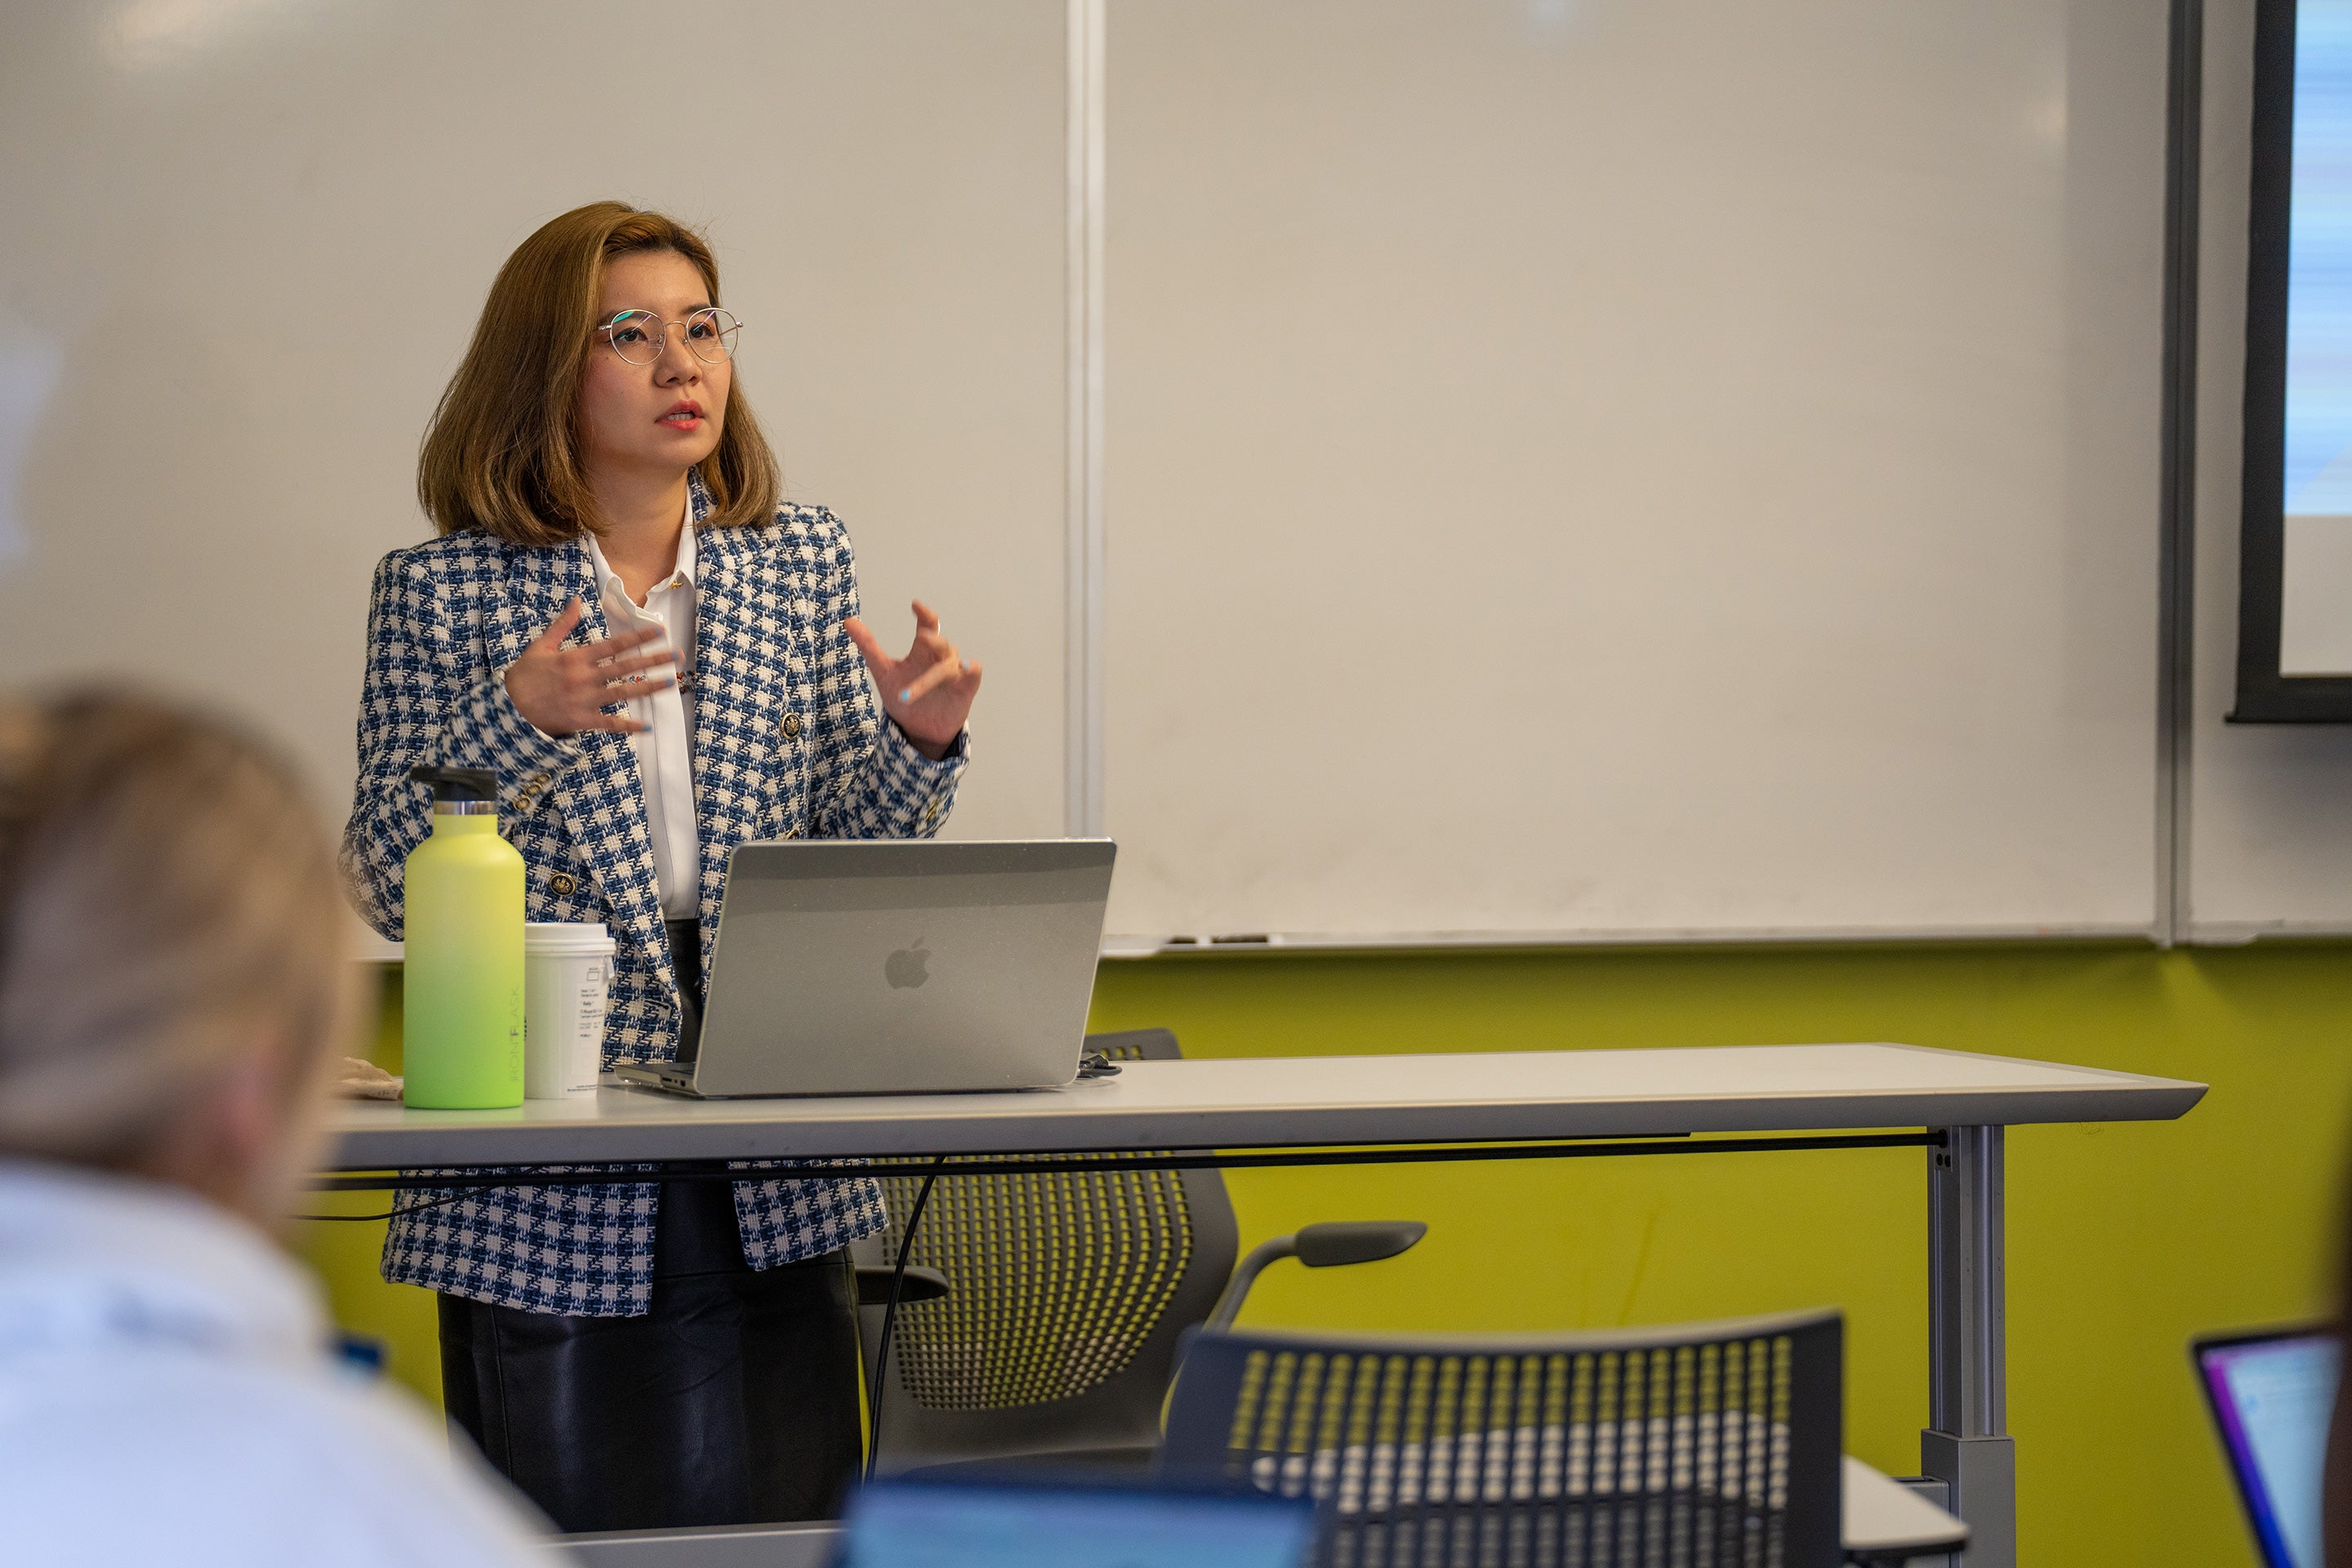 Professor Sally Lim giving a lecture in a classroom